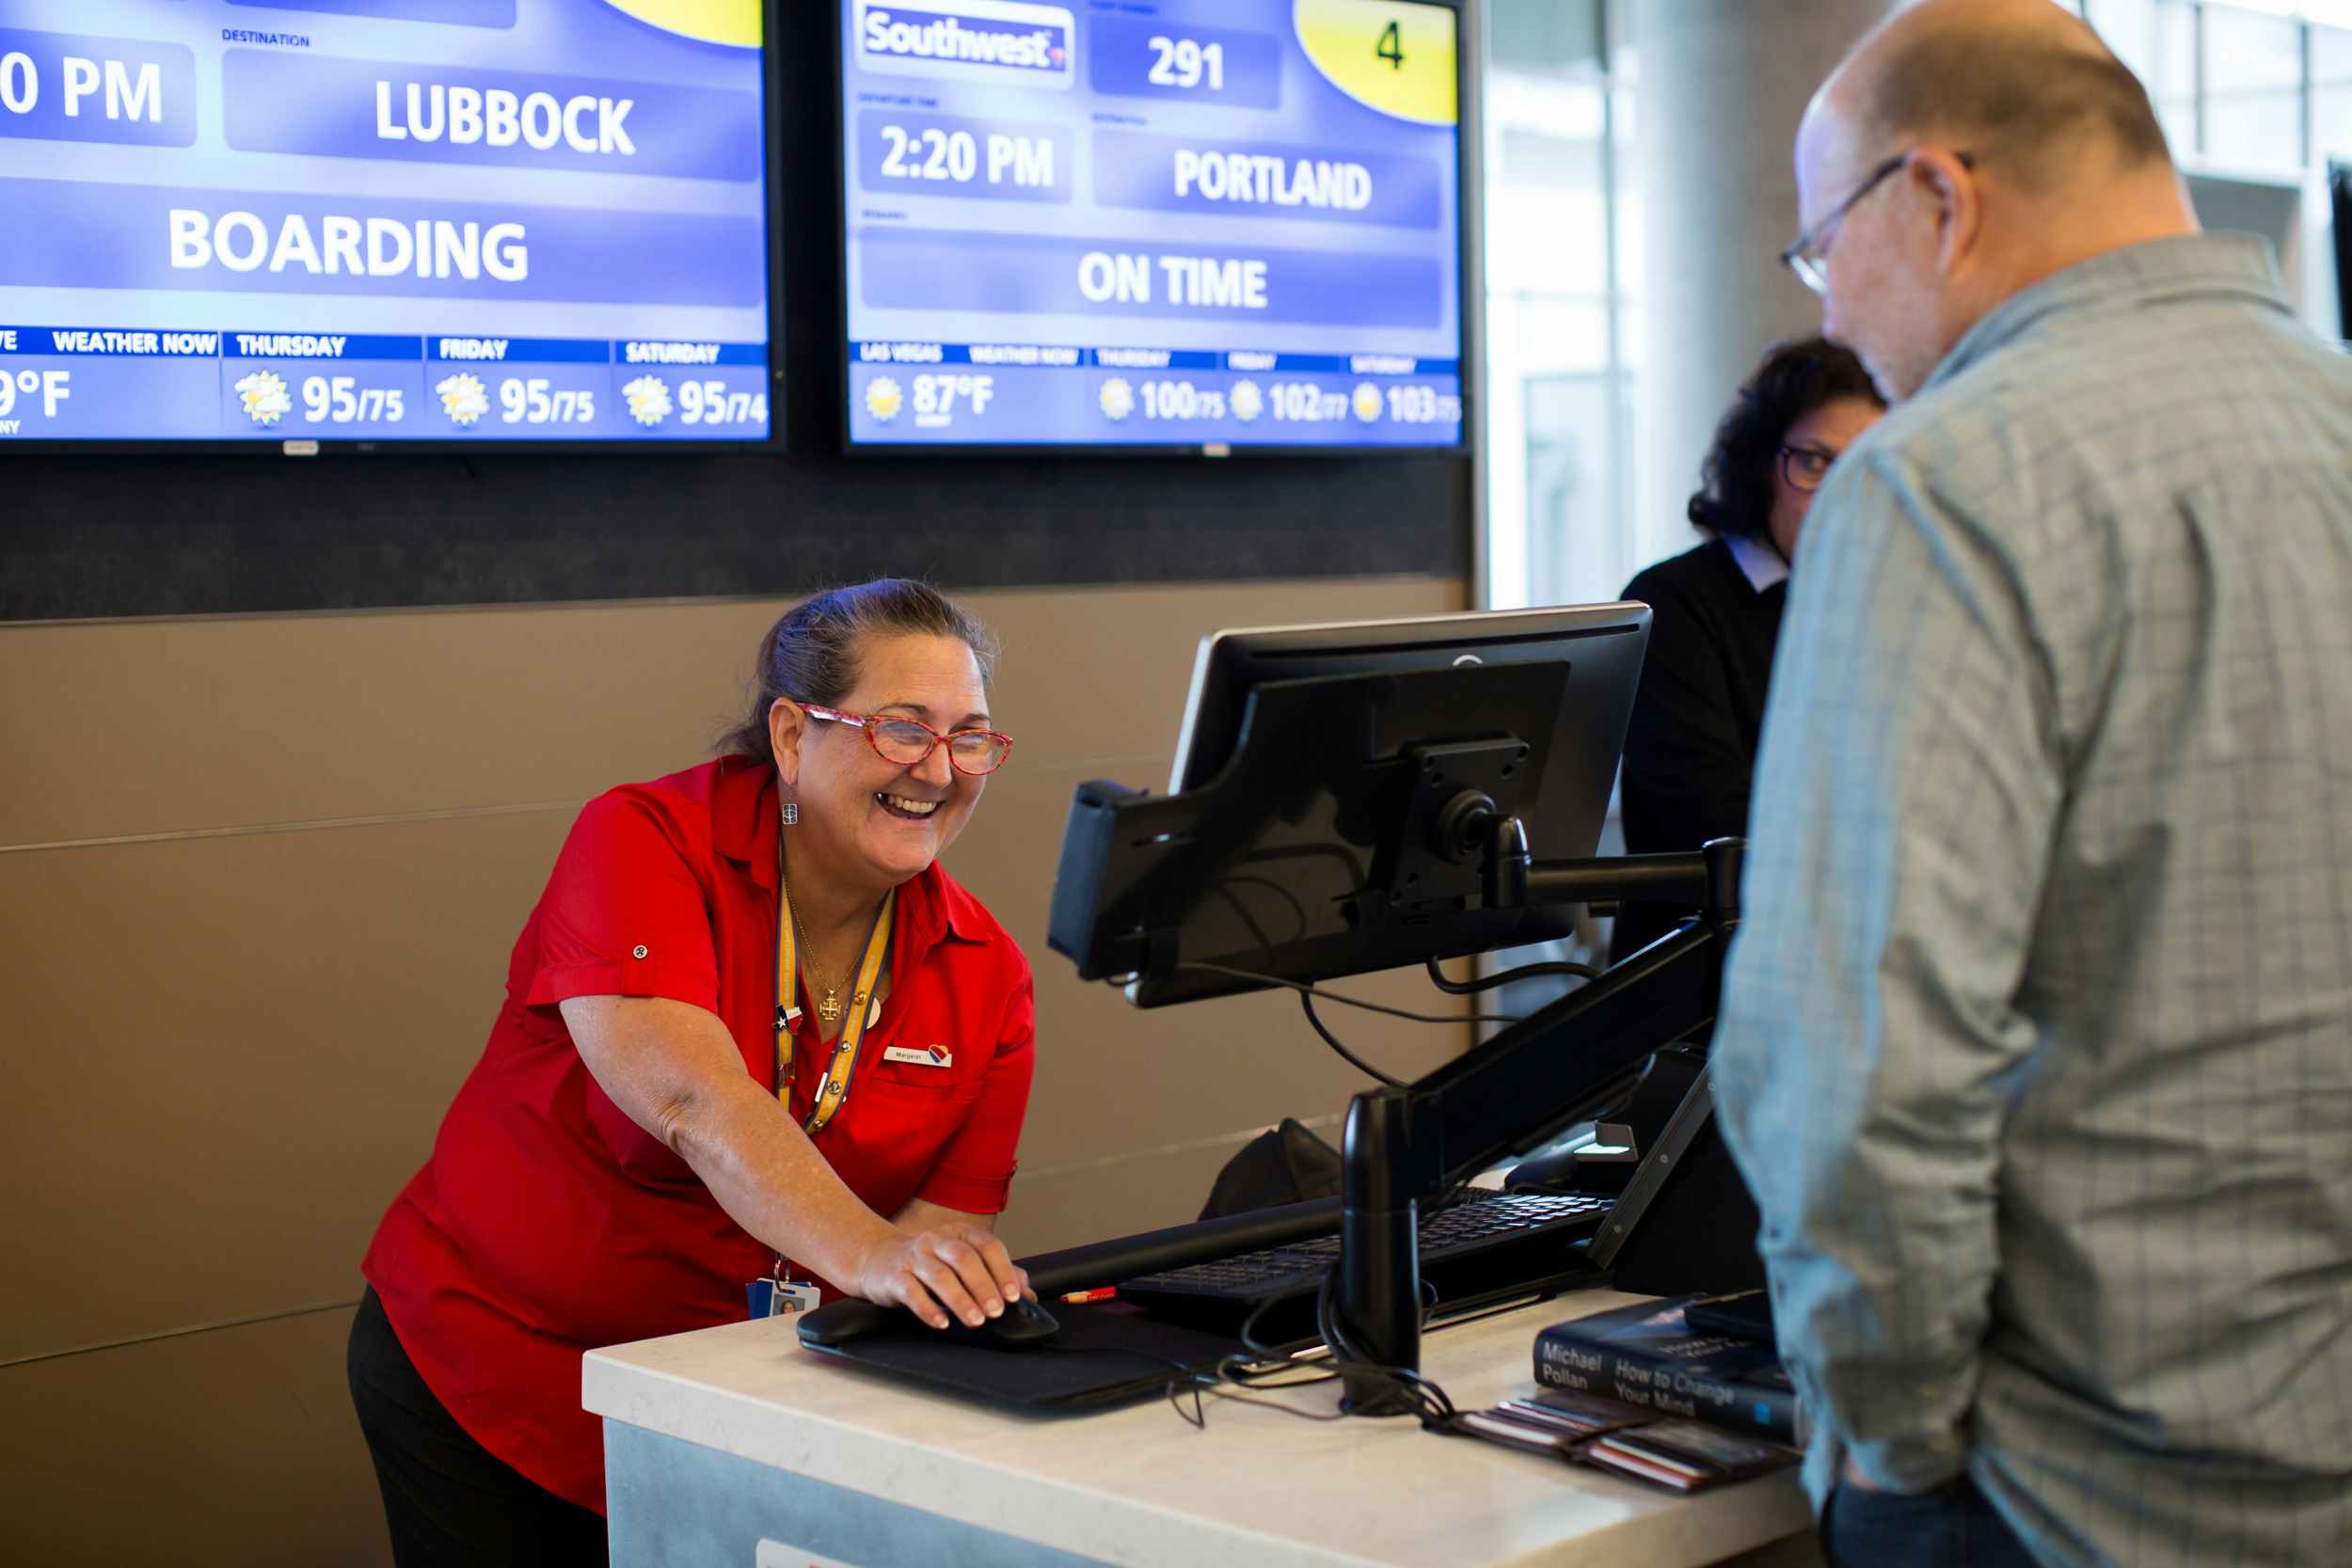 A Southwest employee at the gate desk talking to passengers.